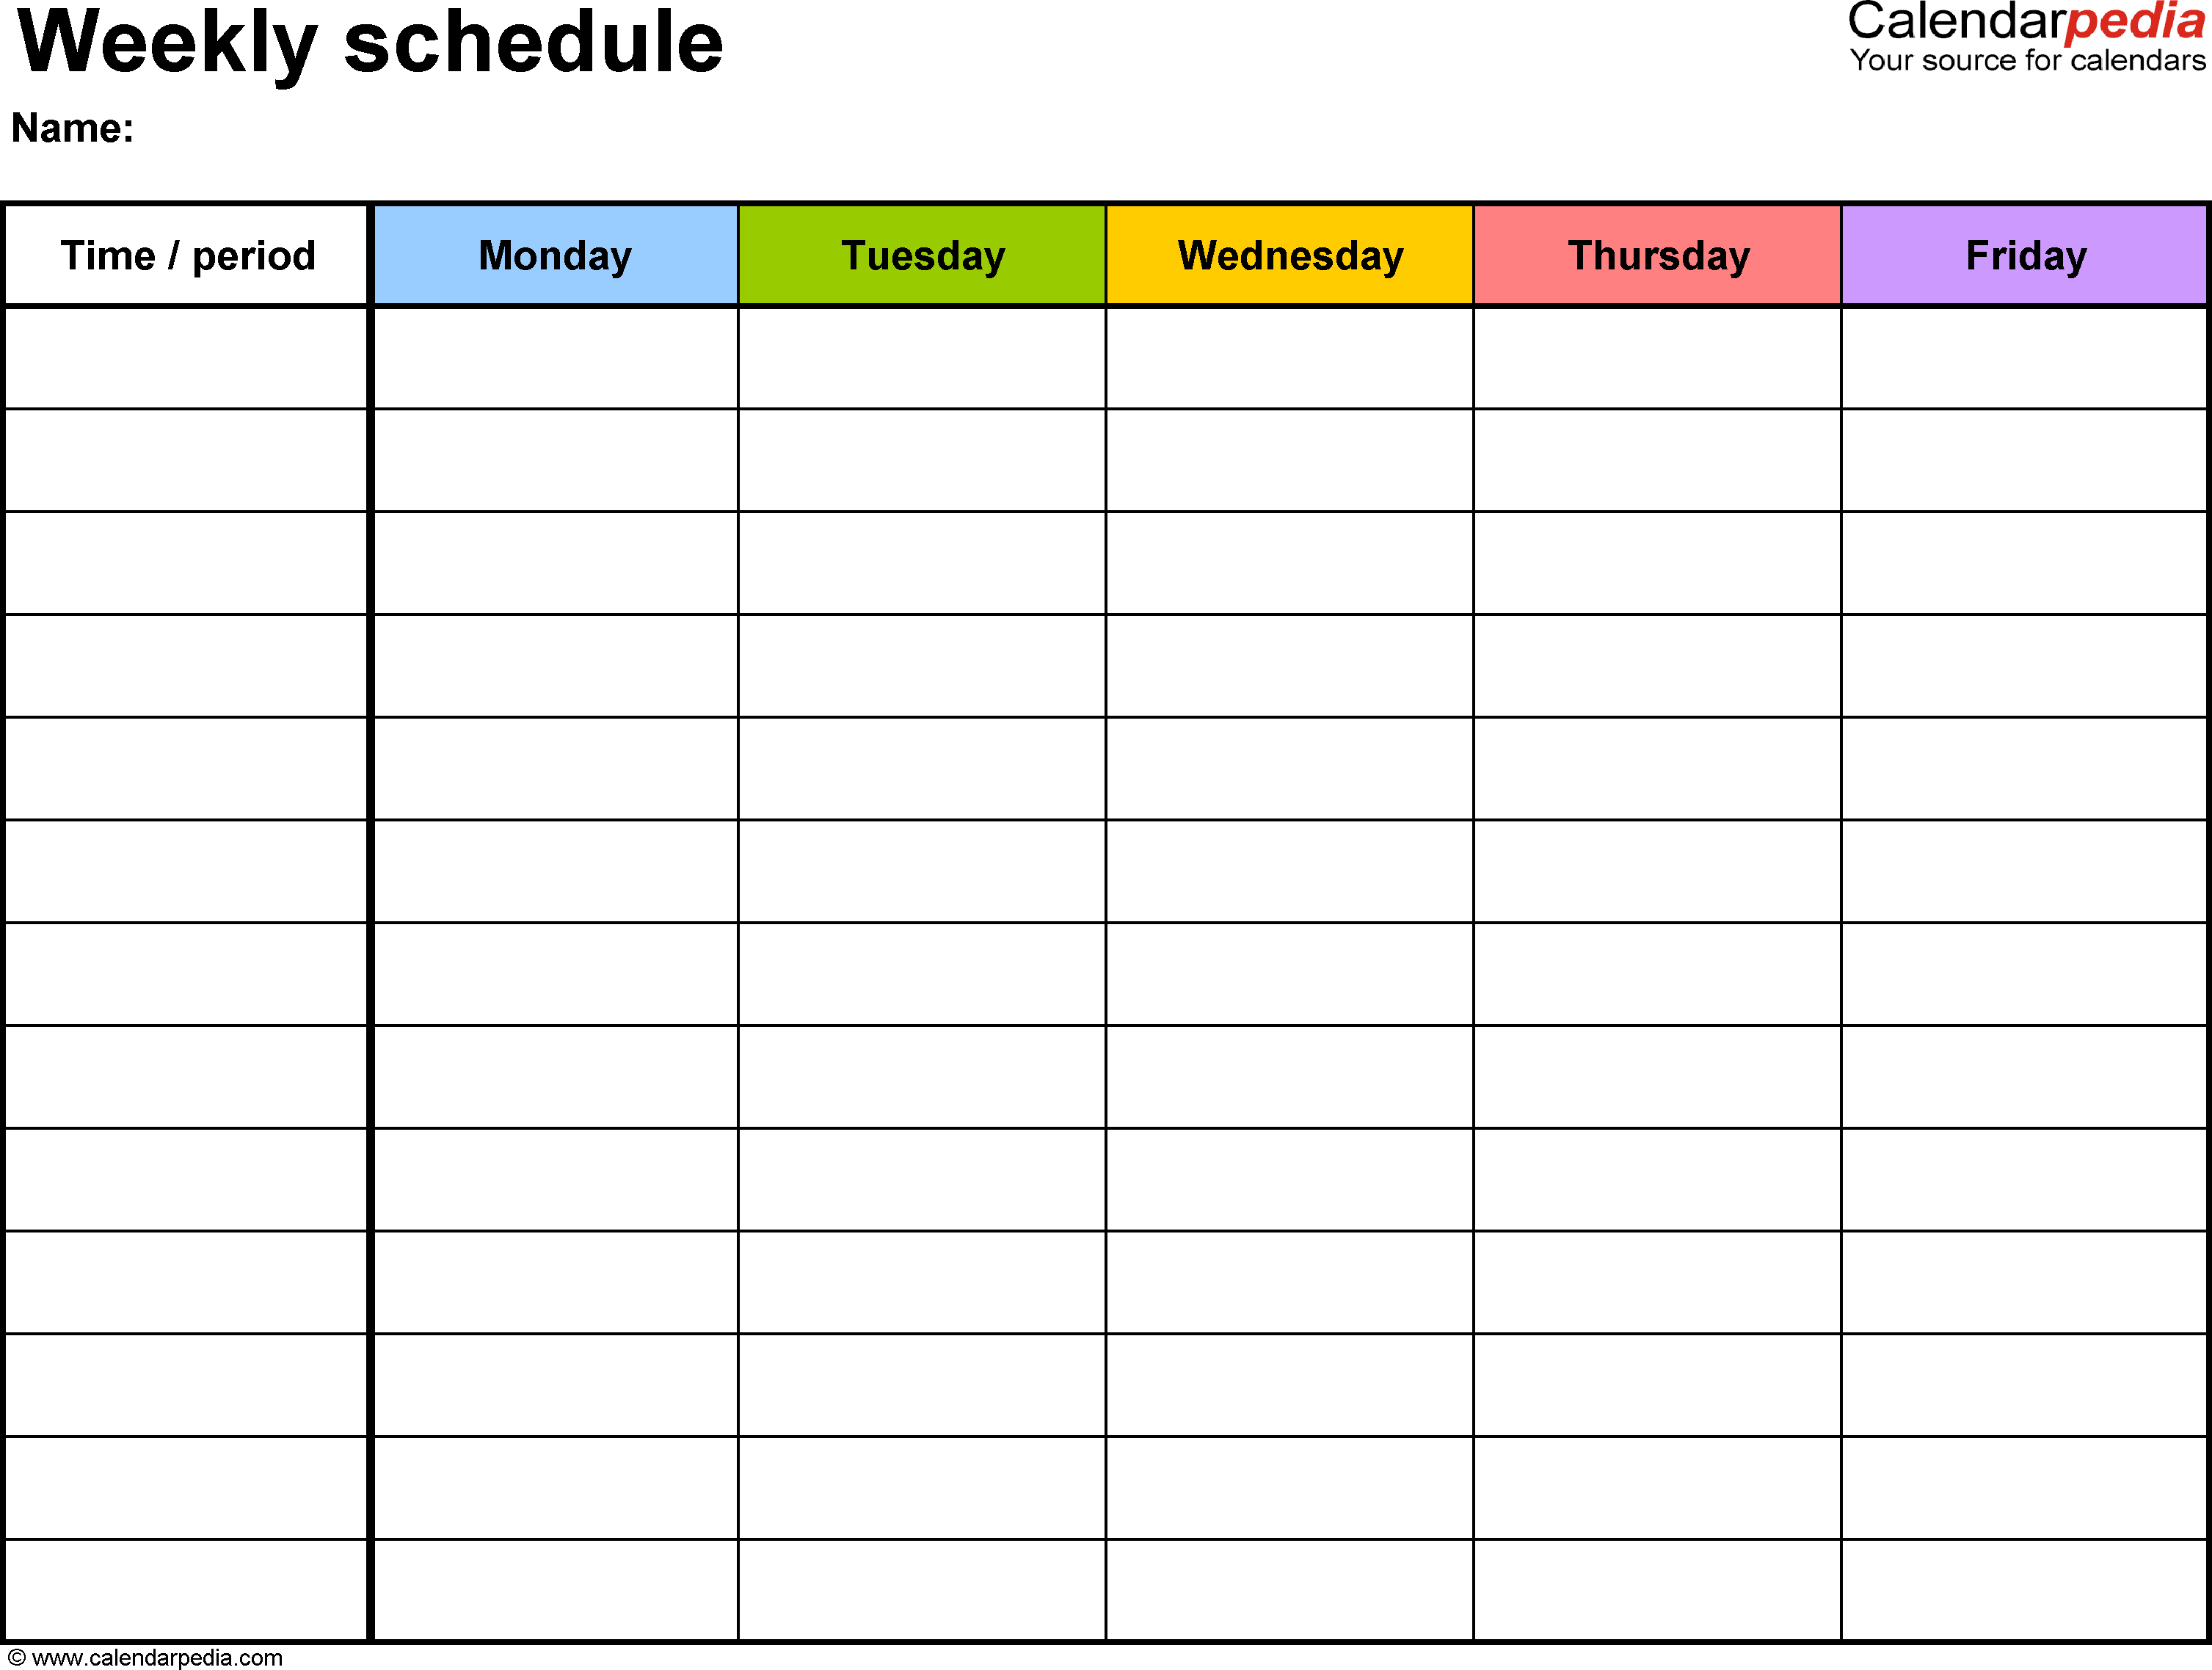 How To Make A Weekly Calendar  Bolan.horizonconsulting.co with regard to Calendar Maker Free Printable